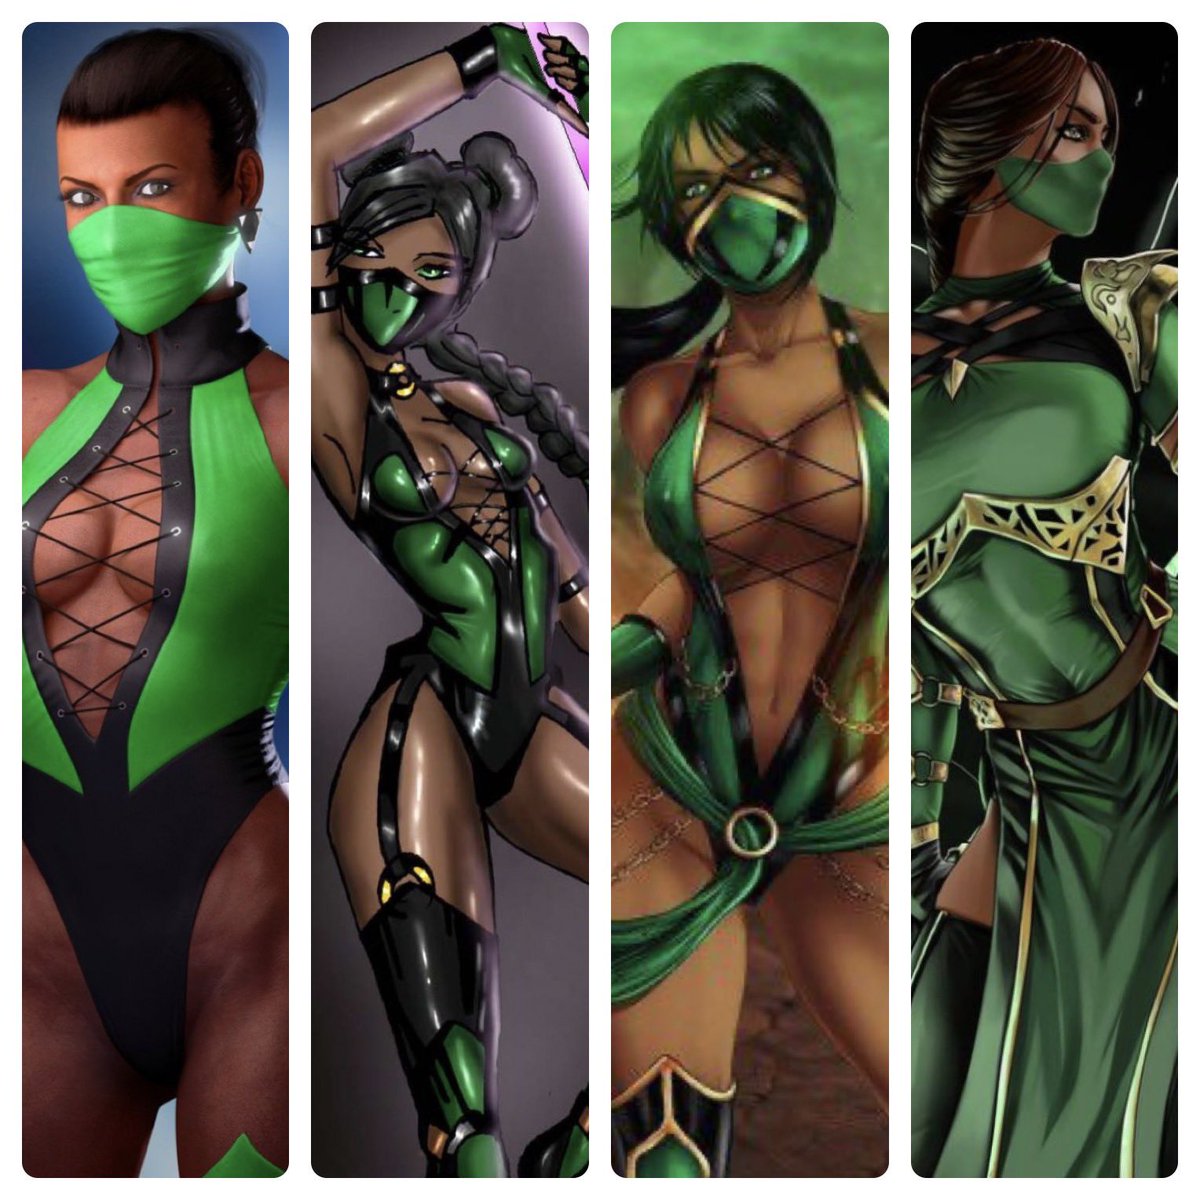 I’m not mad at the graphics

I’m not mad about the Kameos 

I’m not mad that they made Scorpion and Subzero “ brothers 

I’m not mad that Mileena is older then Kitanna 

I’m MAD at the fact they didn’t show Jade, and I have a bad feeling in my gut she’s replace with Tanya